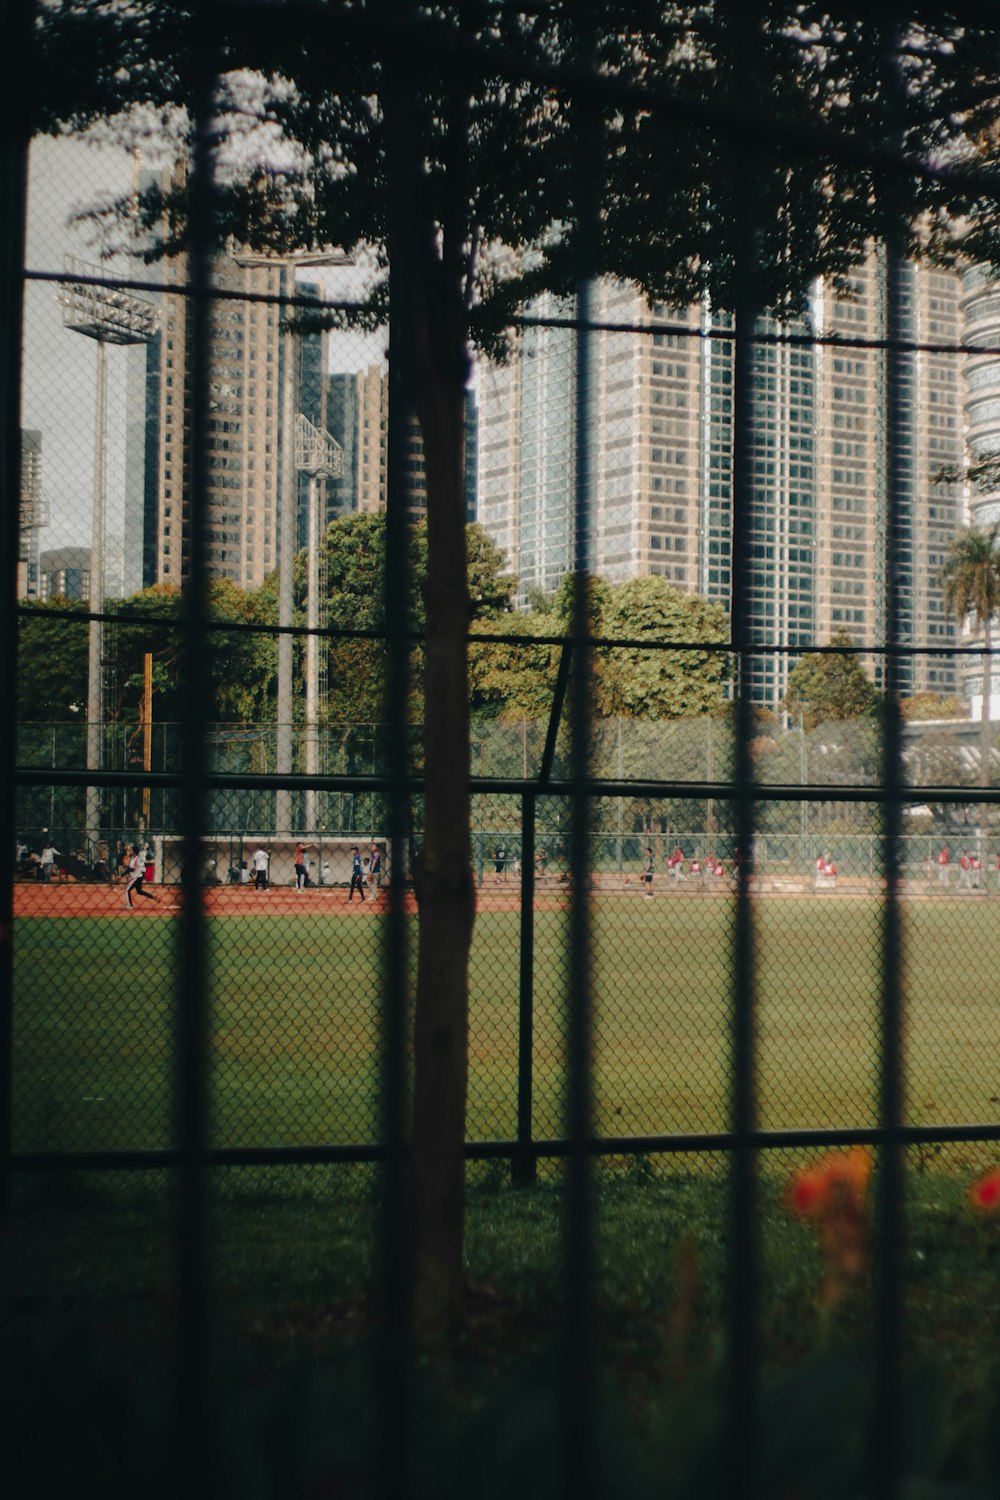 a view of a baseball field through a fence